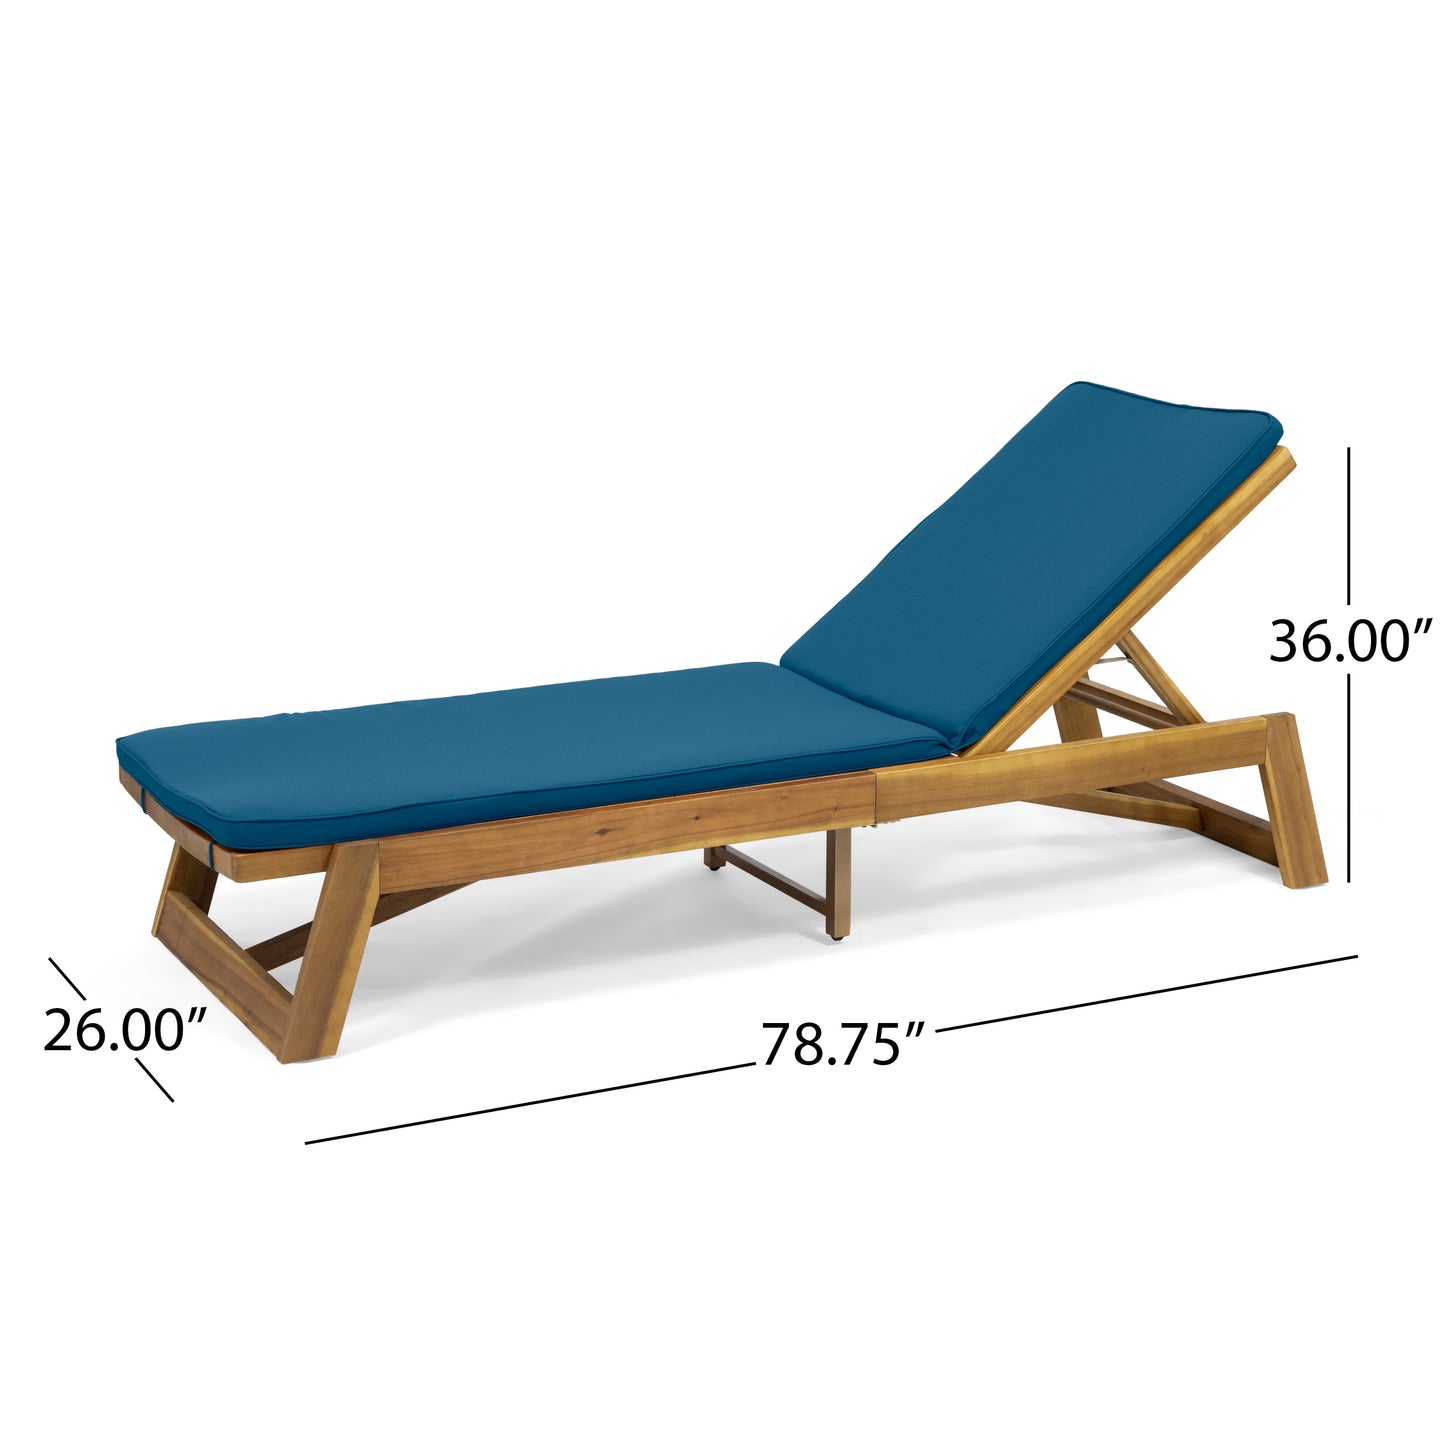 Adelaide Outdoor Acacia Wood Chaise Lounge and Cushion Set